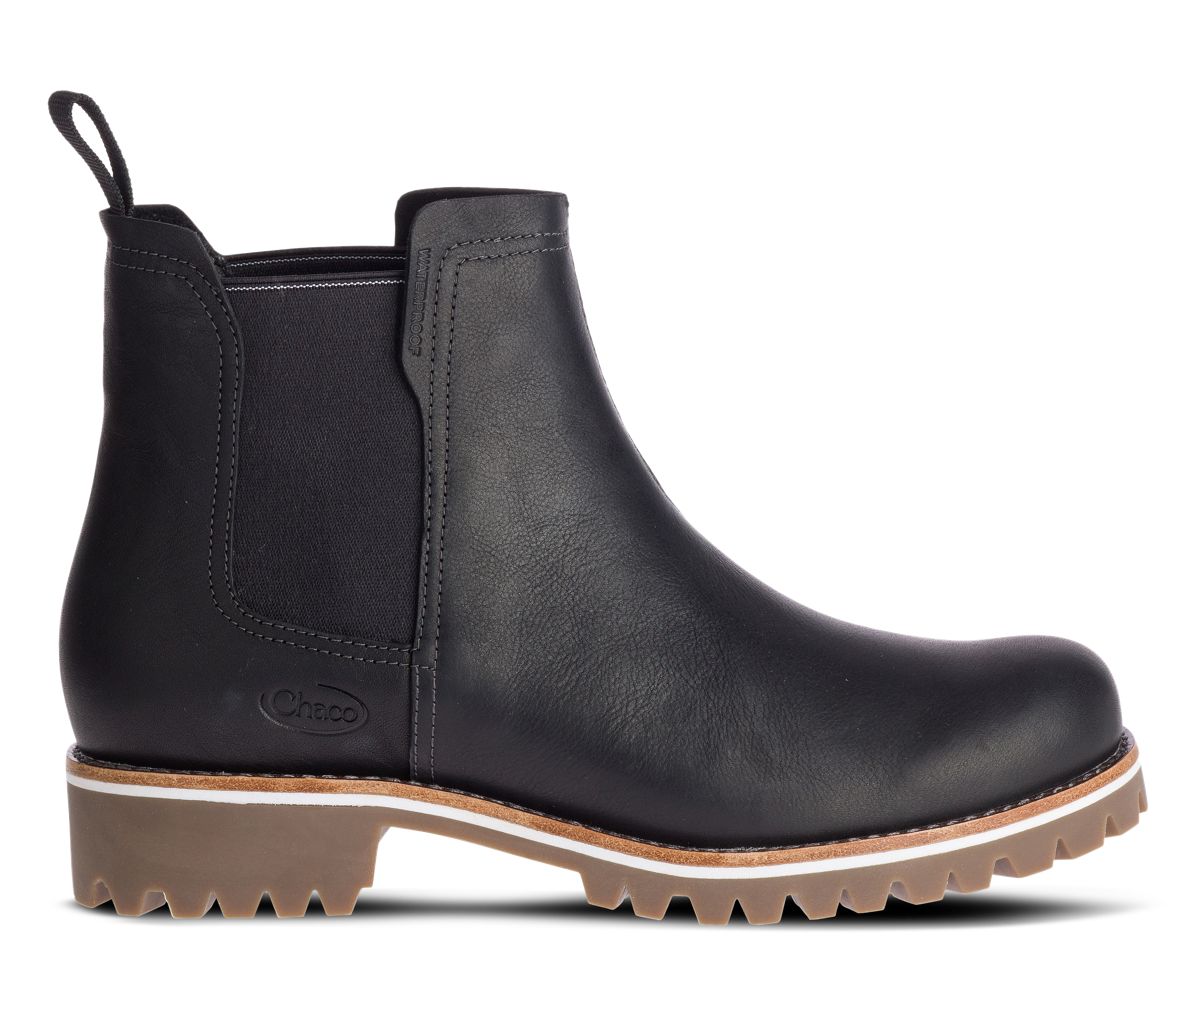 water resistant chelsea boots womens